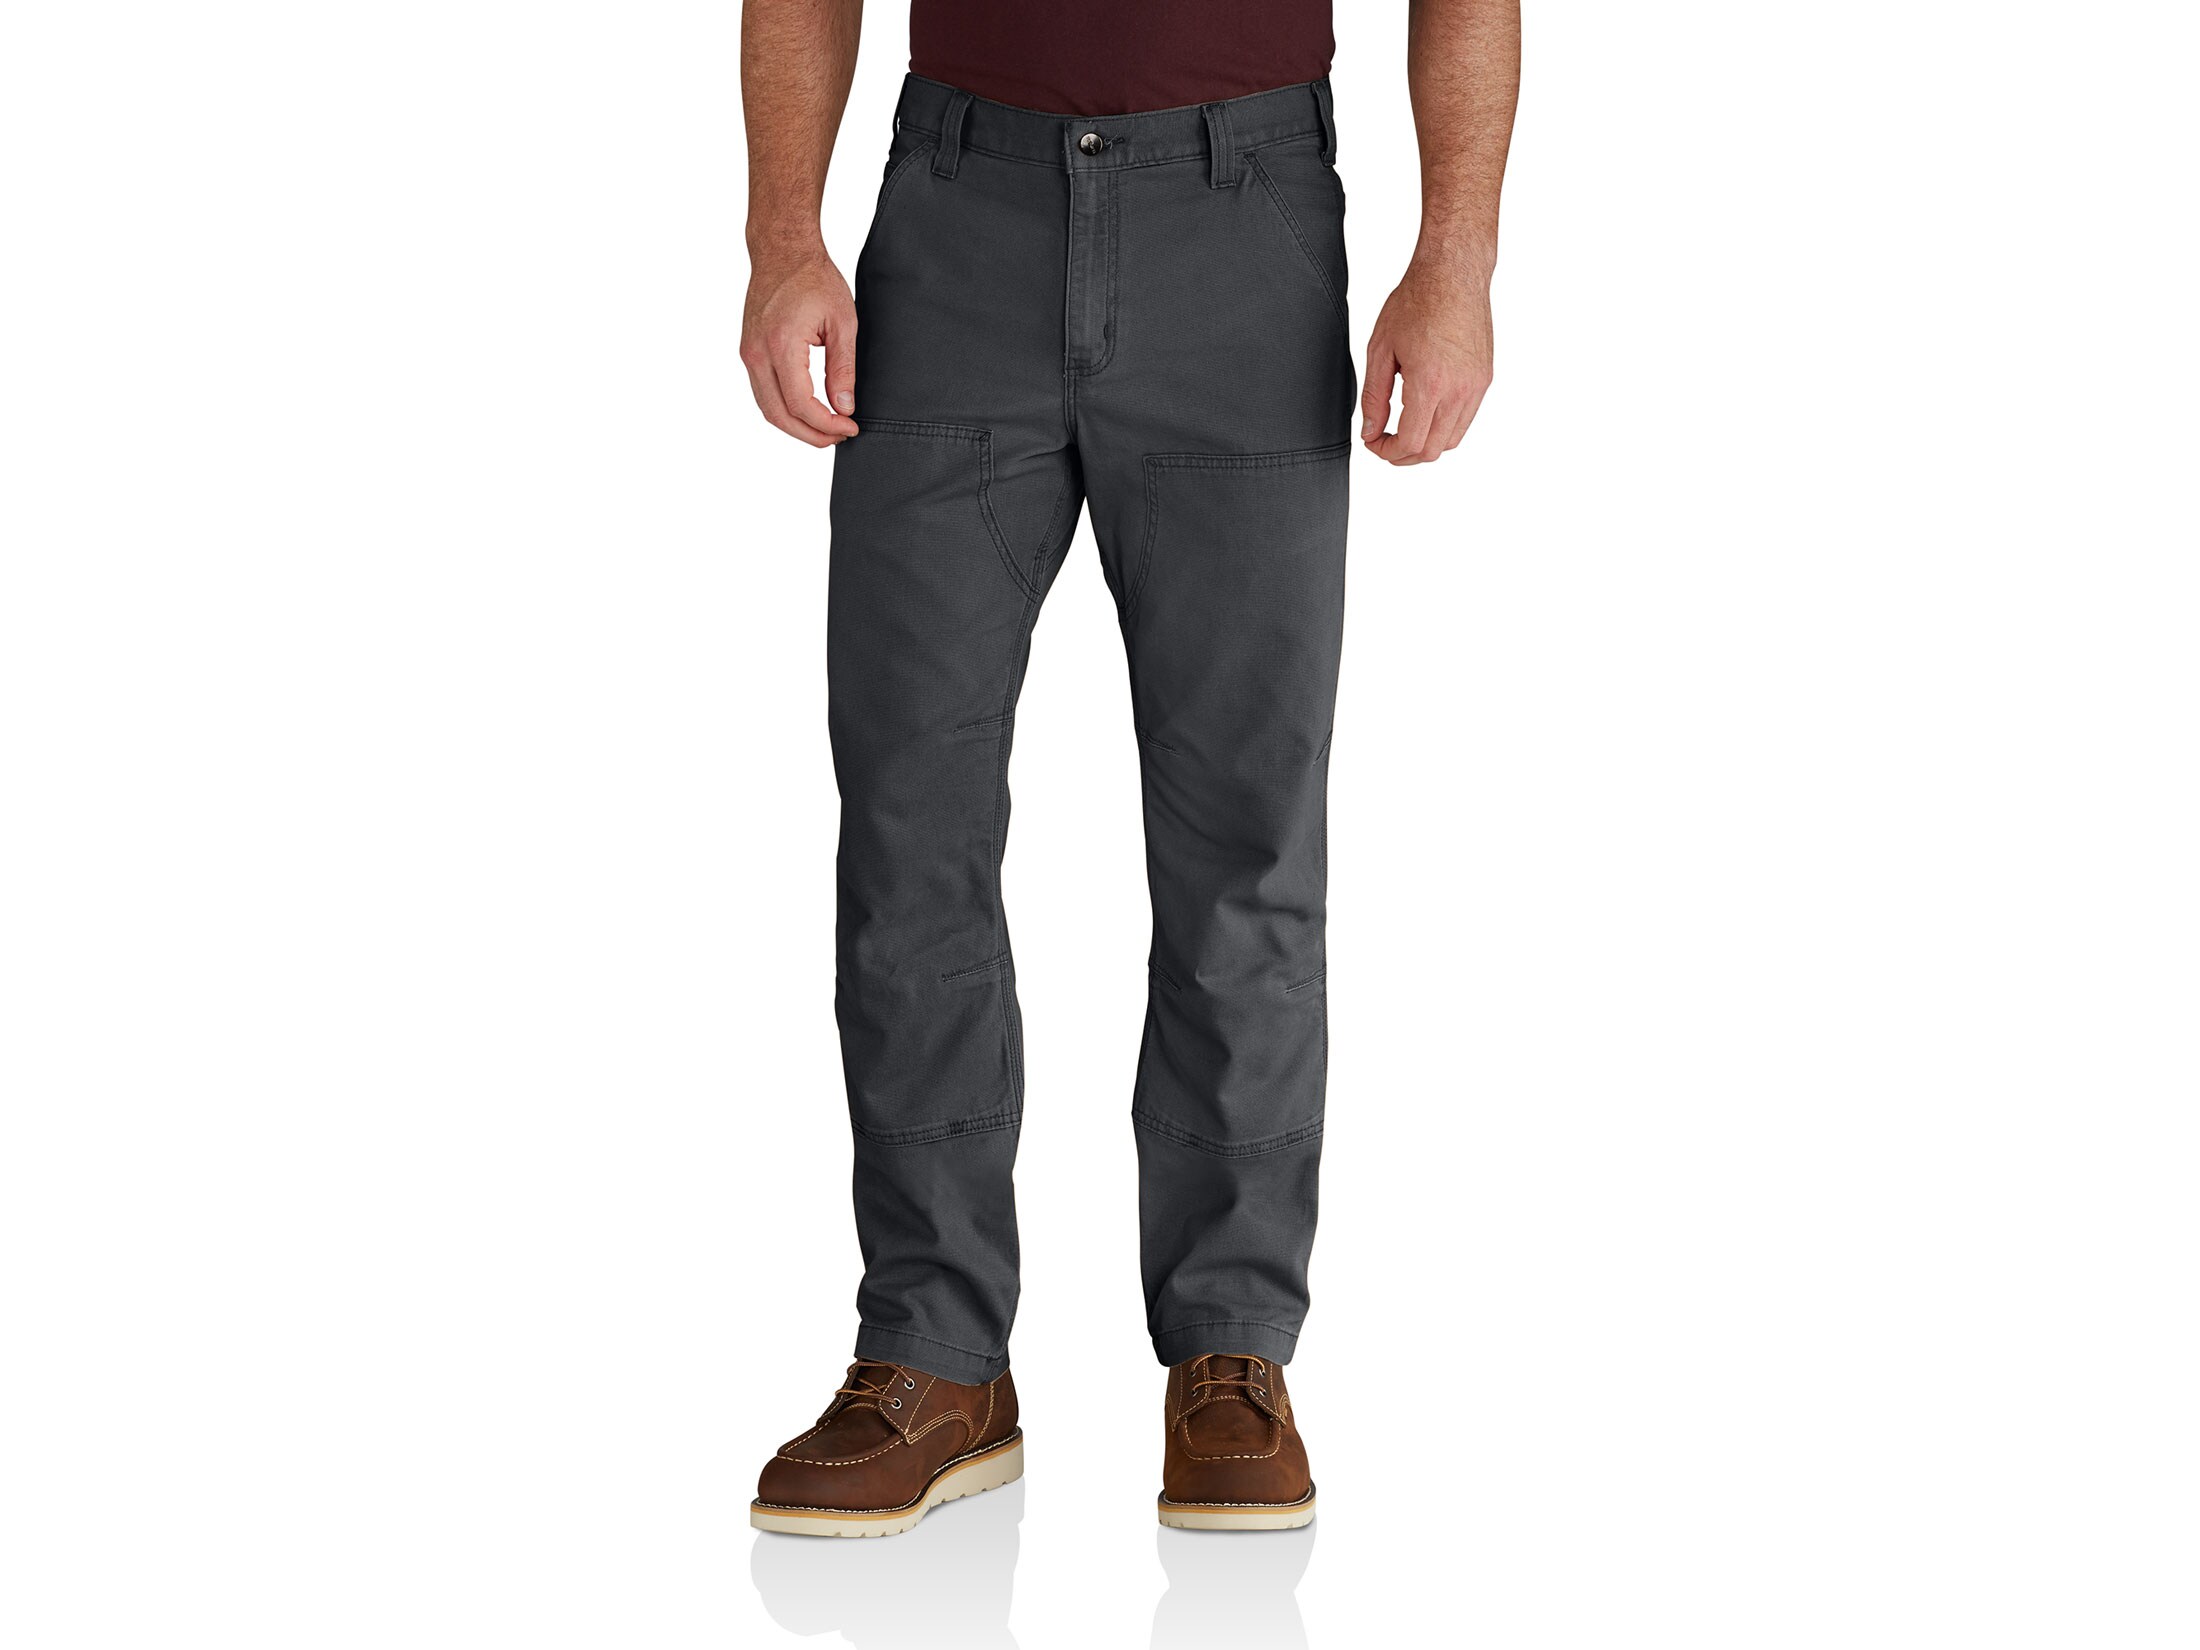 Carhartt Men's Rugged Flex Relaxed Fit Canvas Double Front Utility